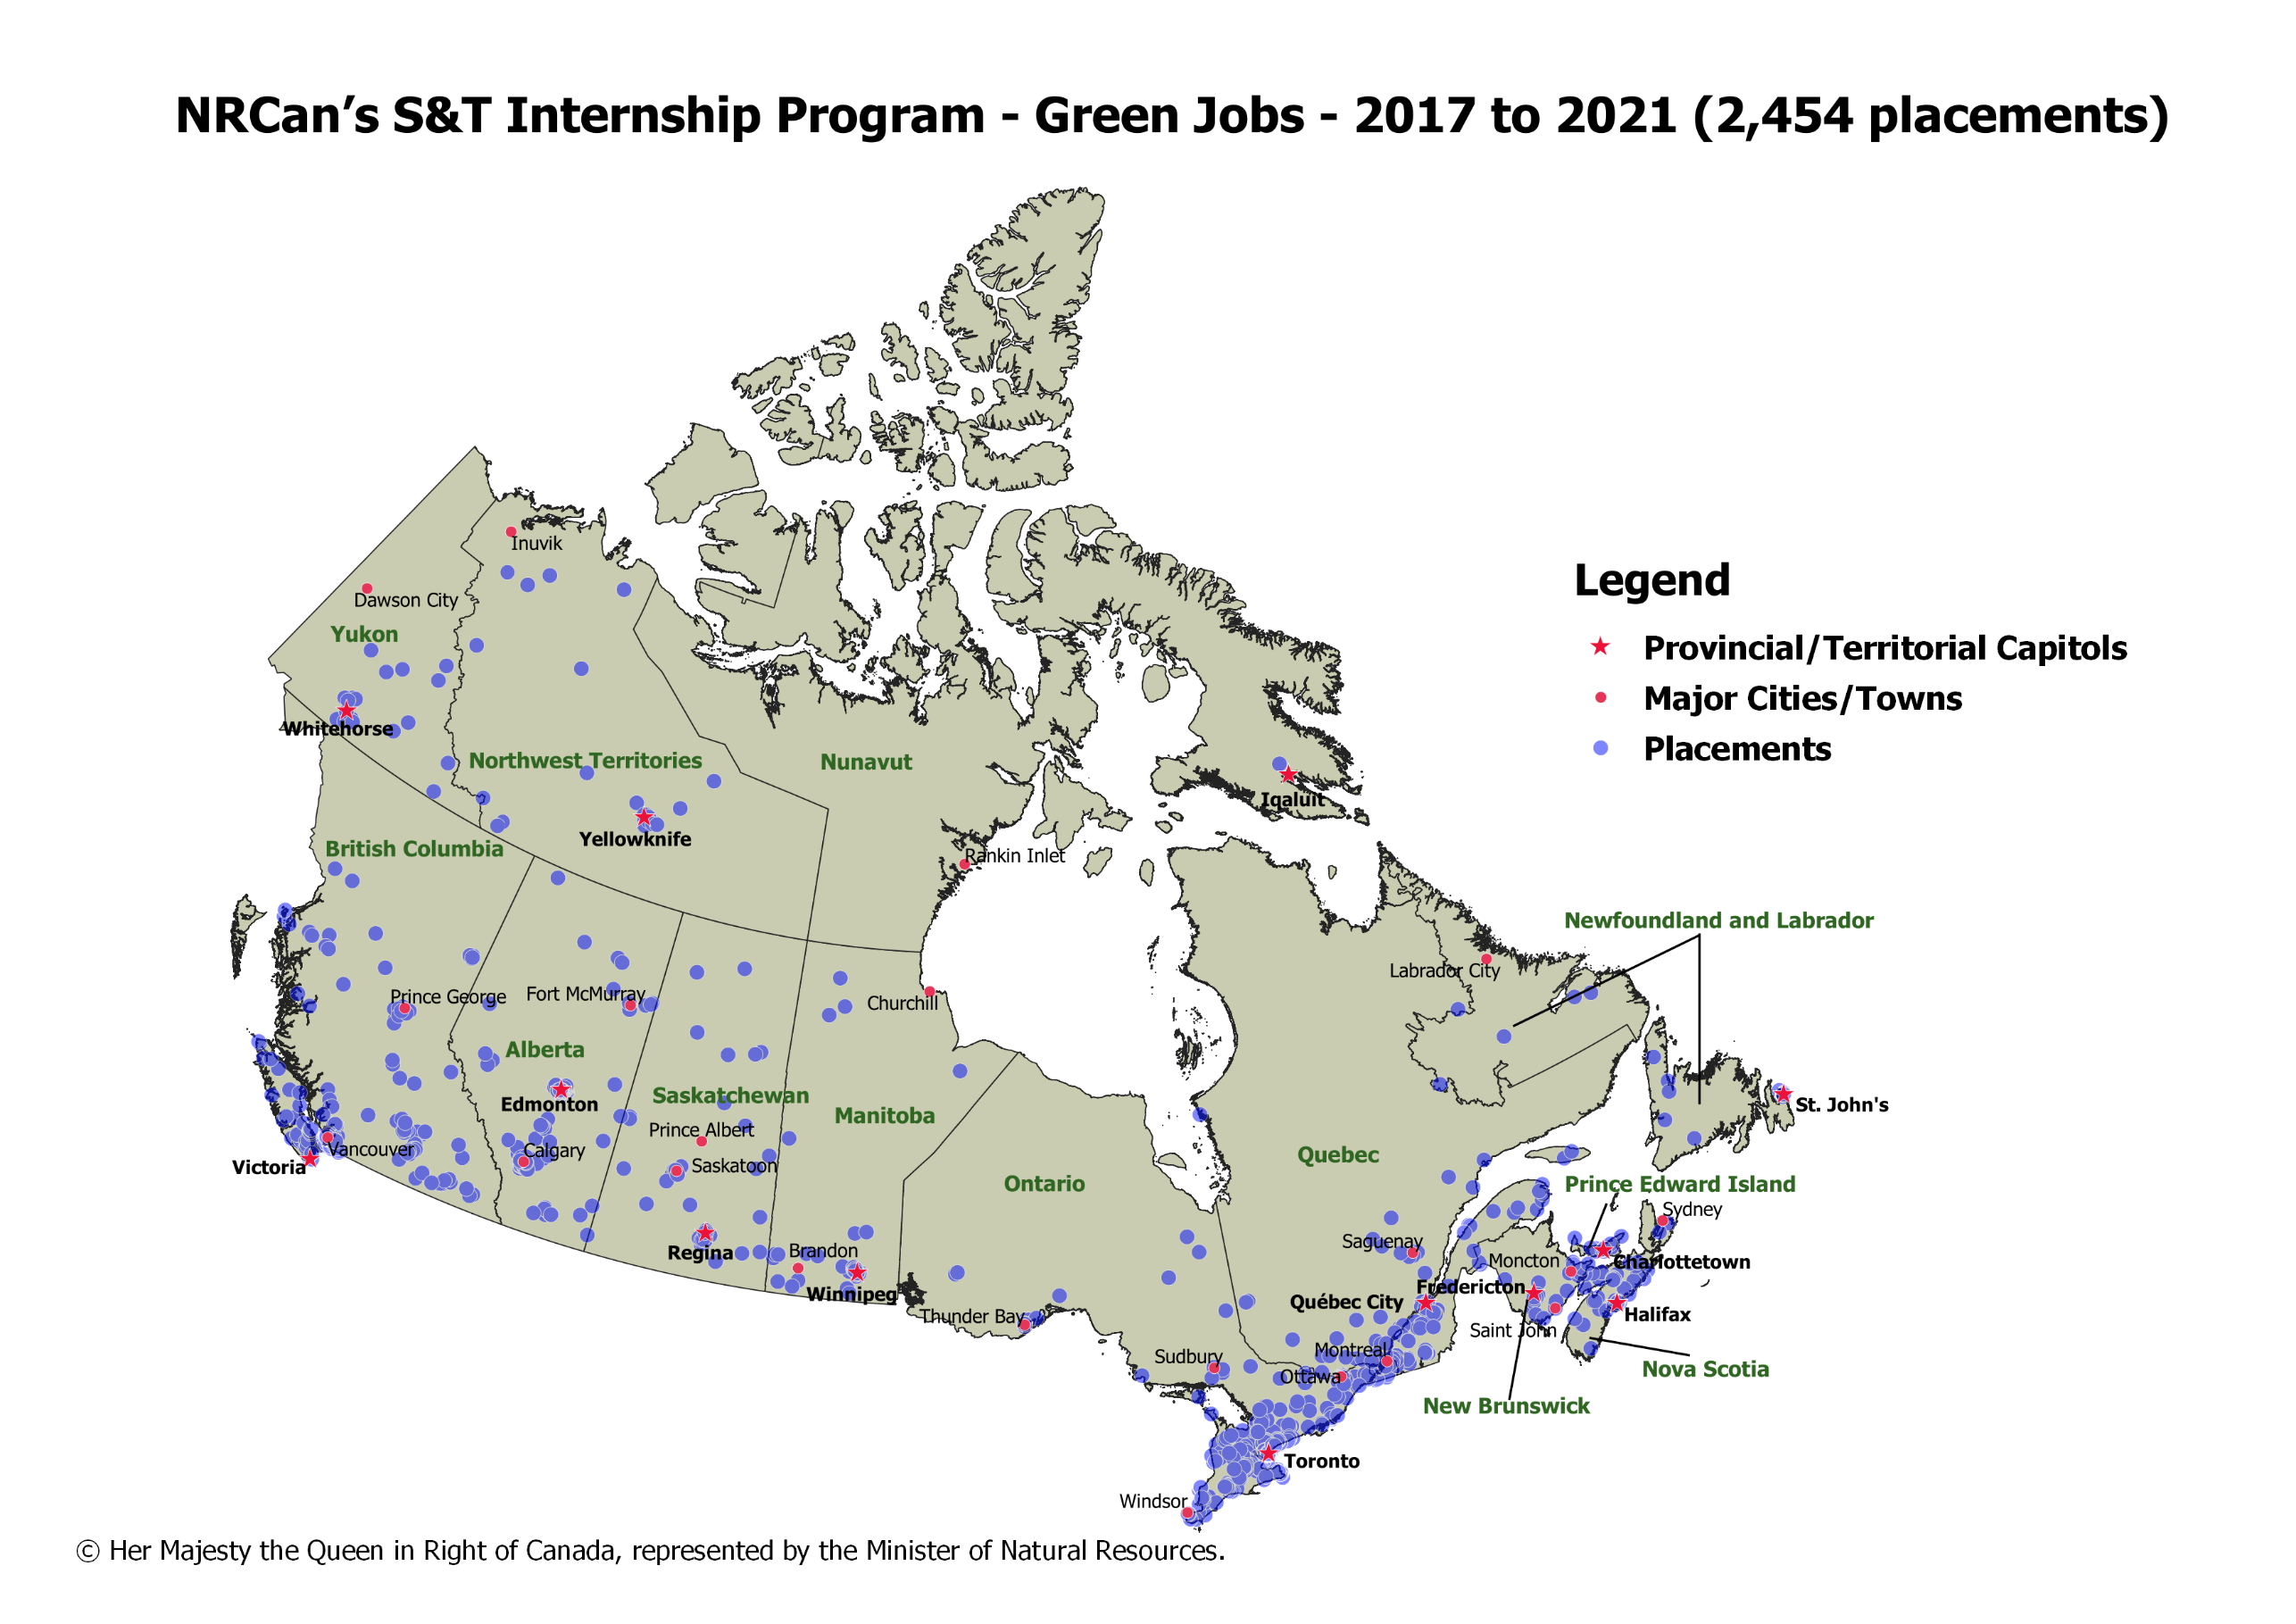 Map of Canada showing NRCan Green Job Placements under the Science and Technology Internship Program